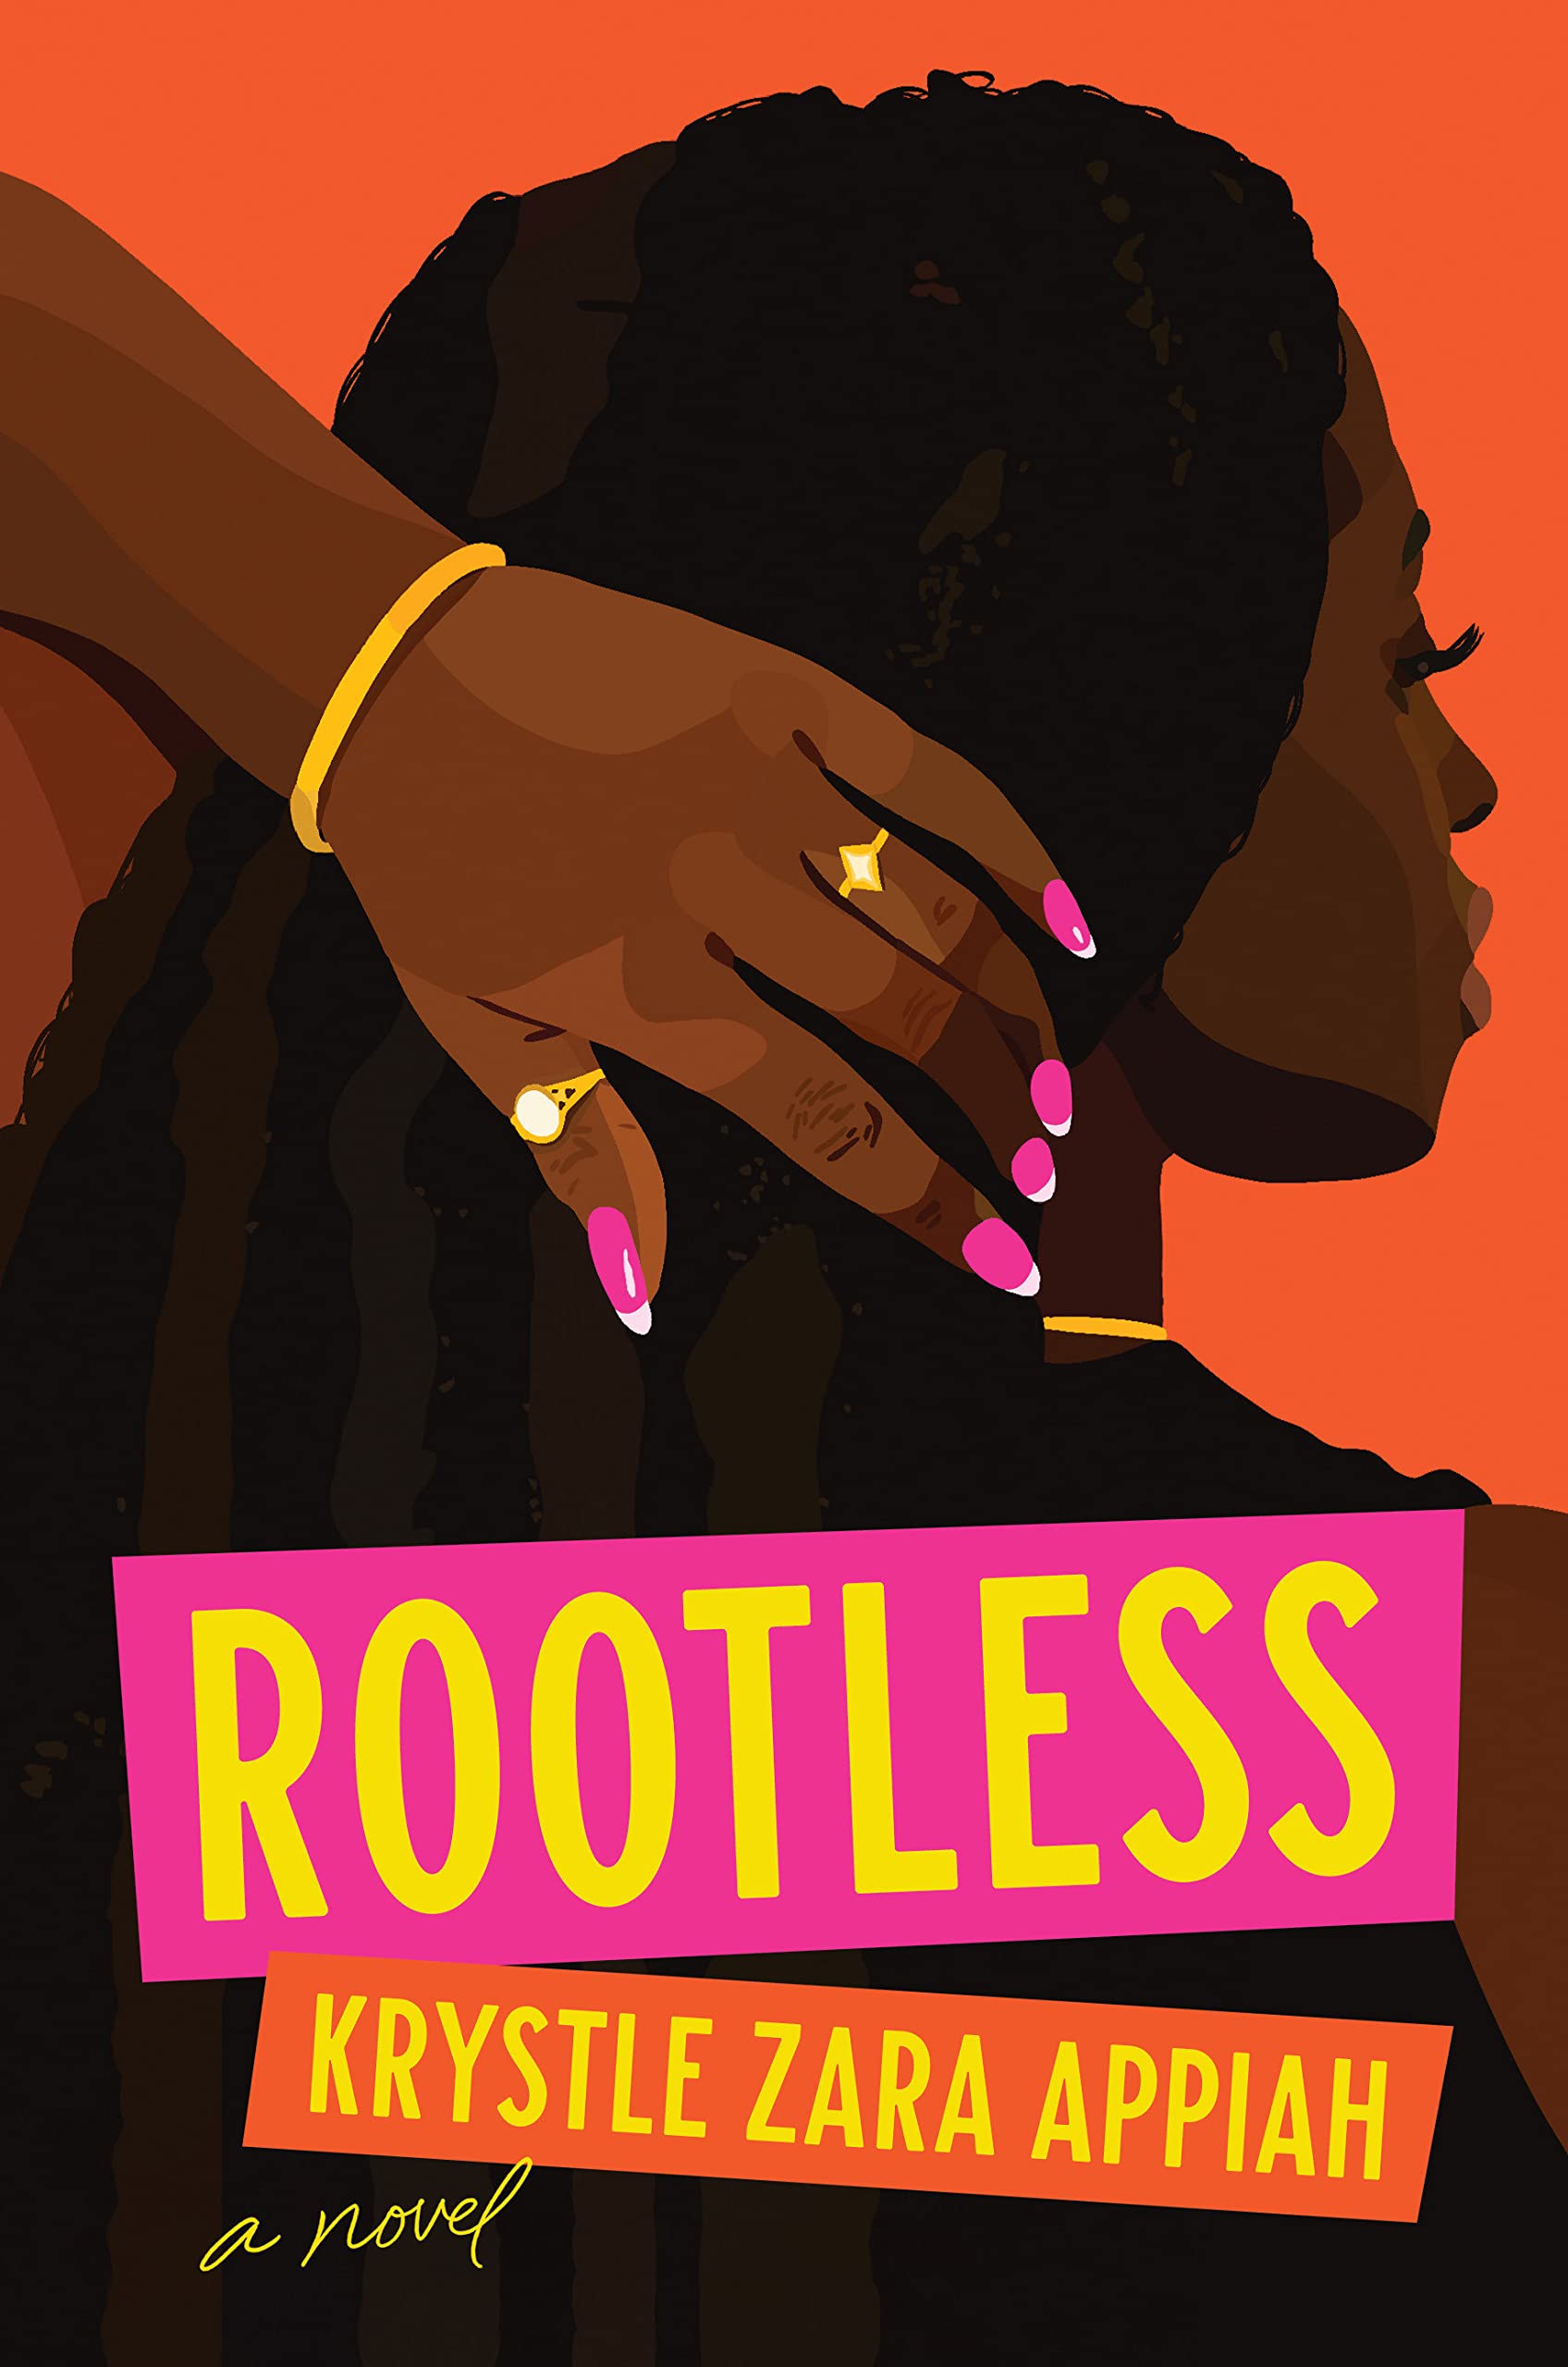 Image for "Rootless"